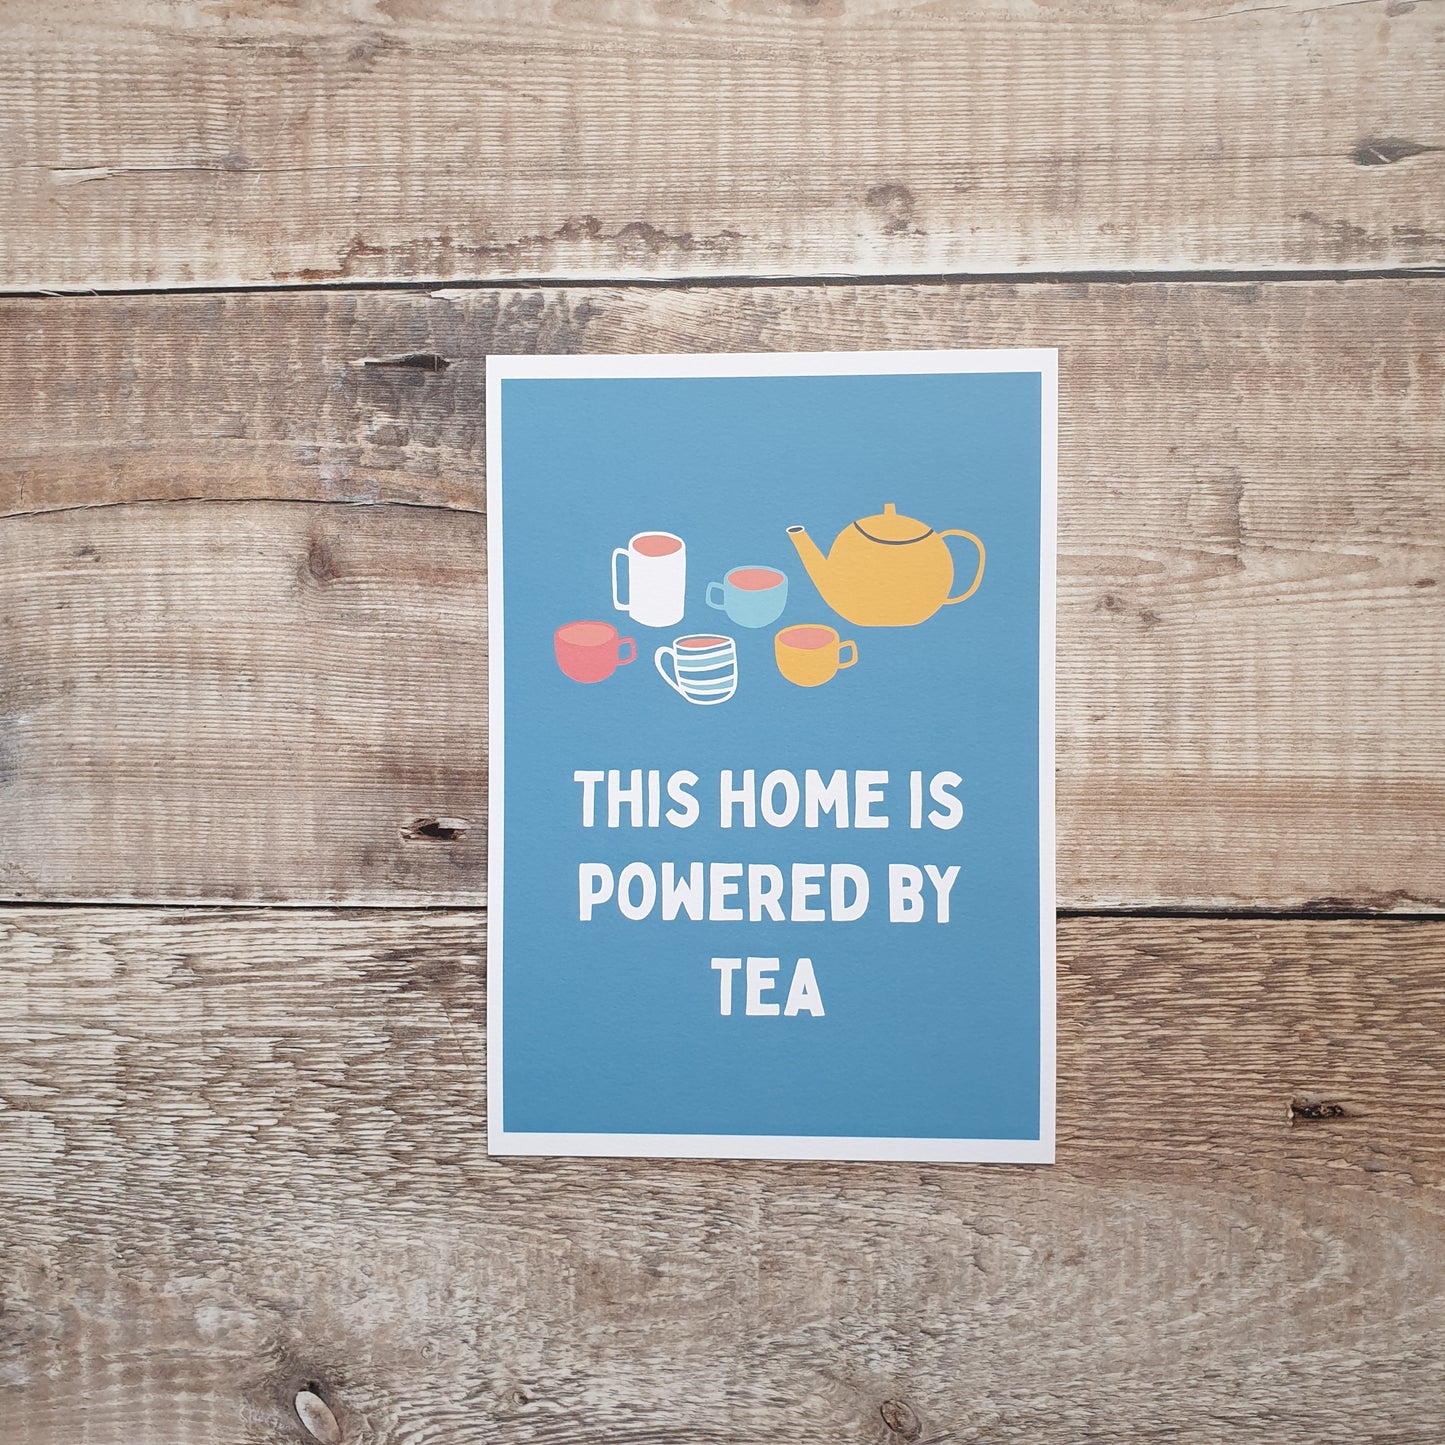 This Home is powered by Tea Art Print